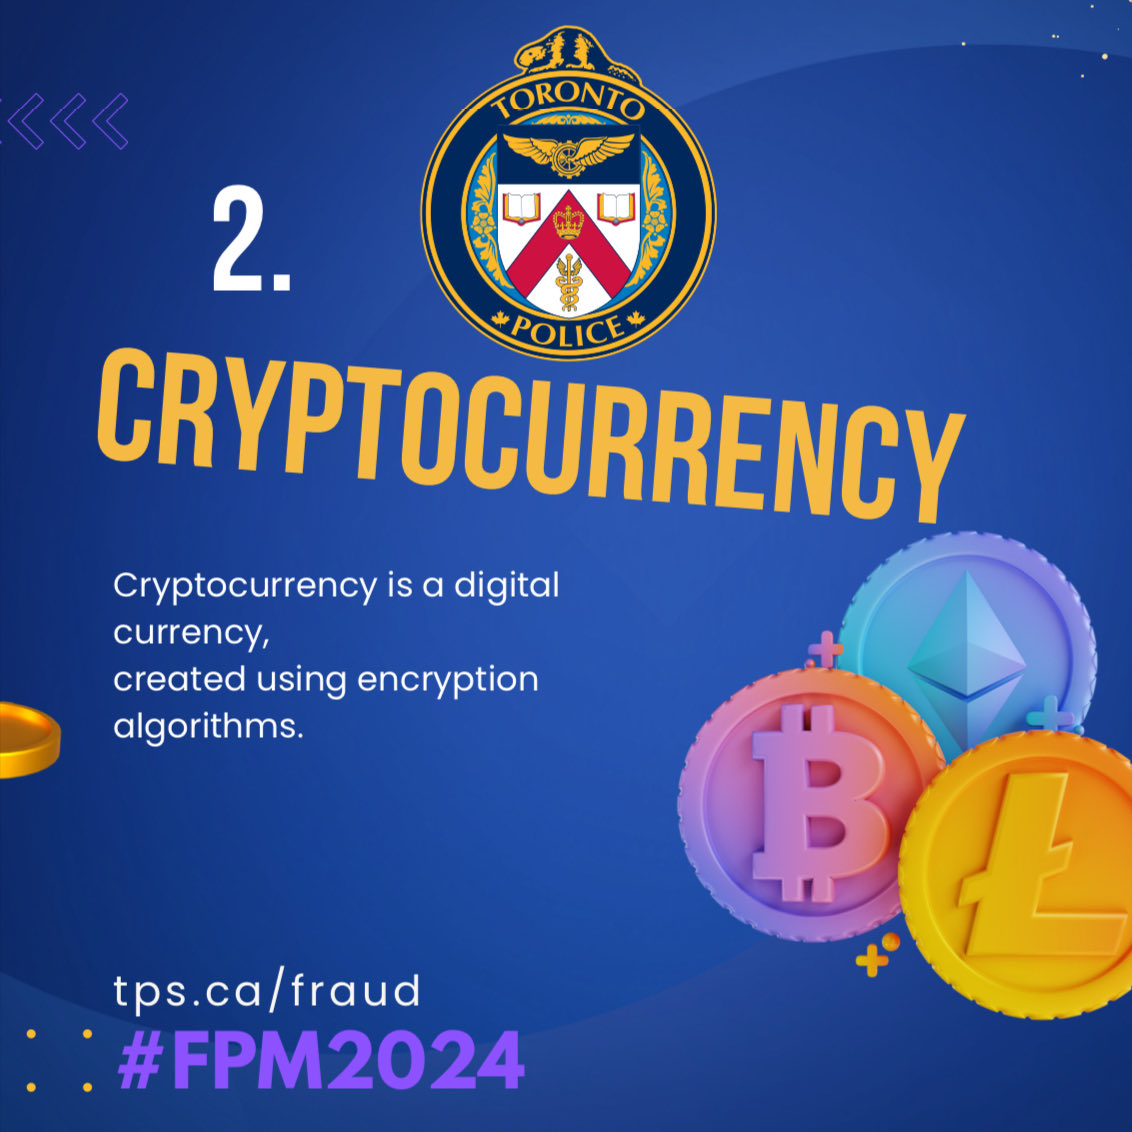 Protect yourself-Always keep your personal banking information and digital wallet safe. Use multi-factor authentication. #Don'tGetScammed #FPM2024 ⁦@TPS_CPEU⁩